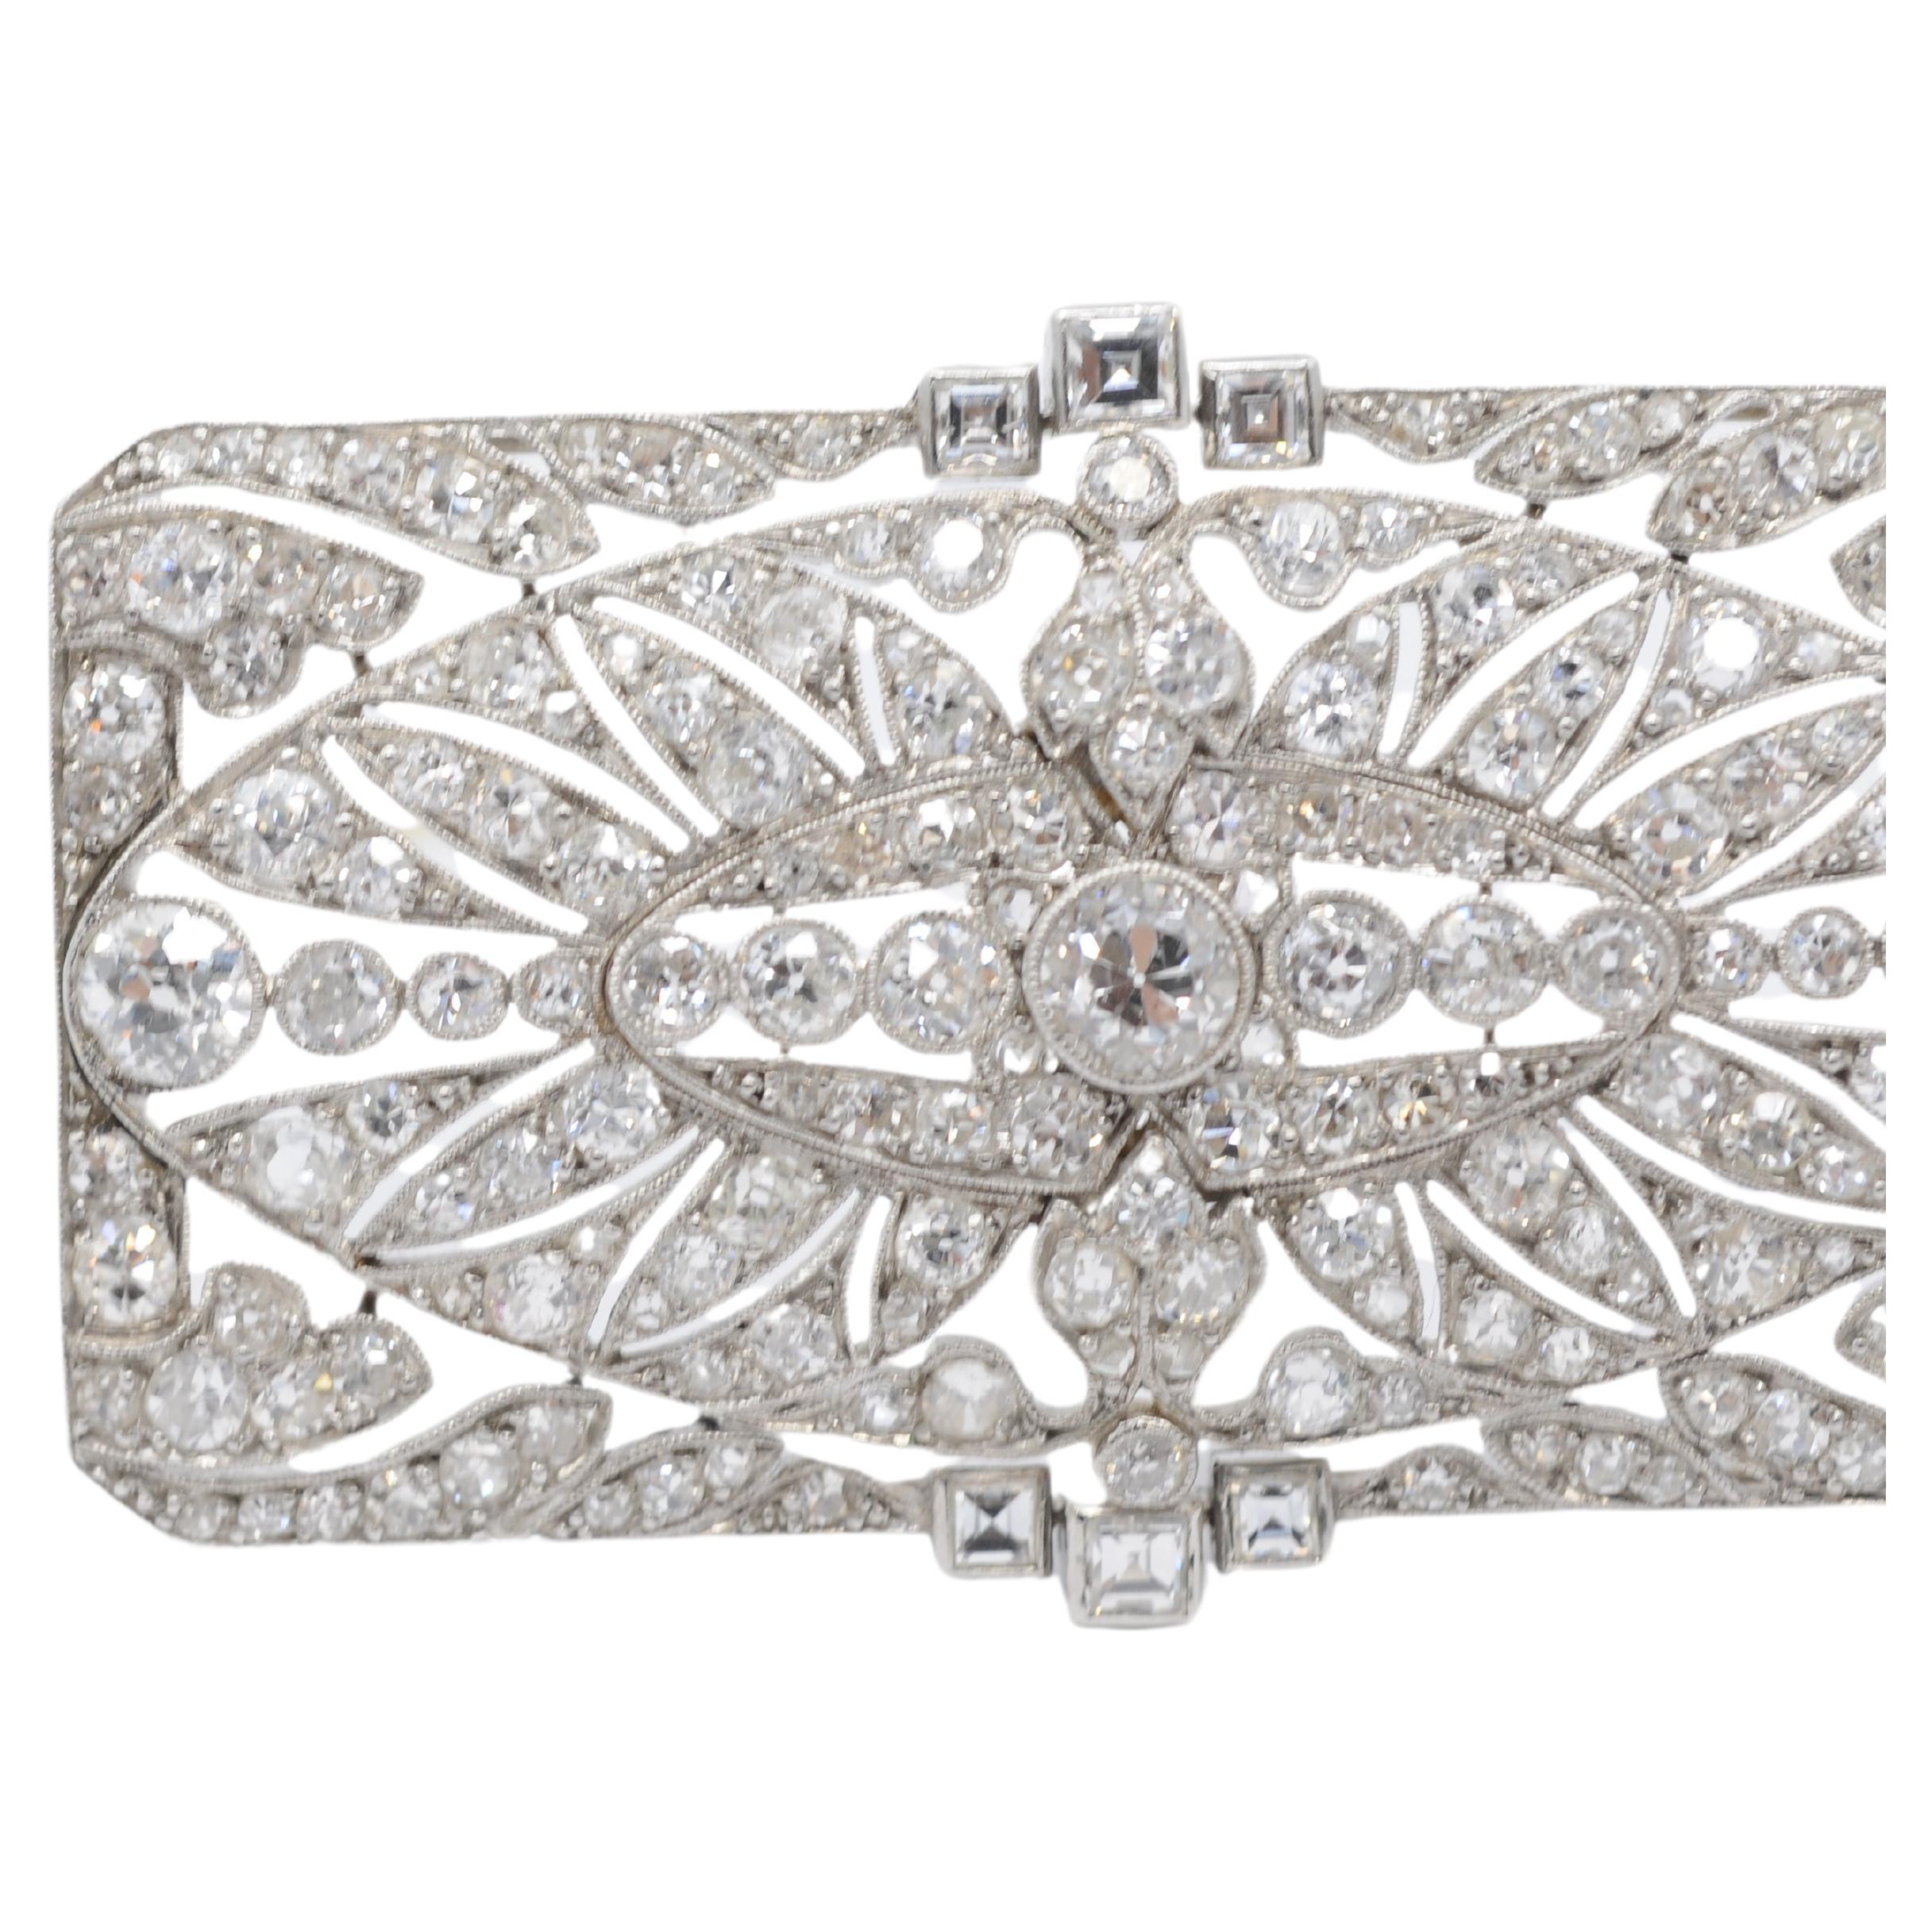 Art deco brooch with 170 diamonds in Old European cut noble platinum  For Sale 4